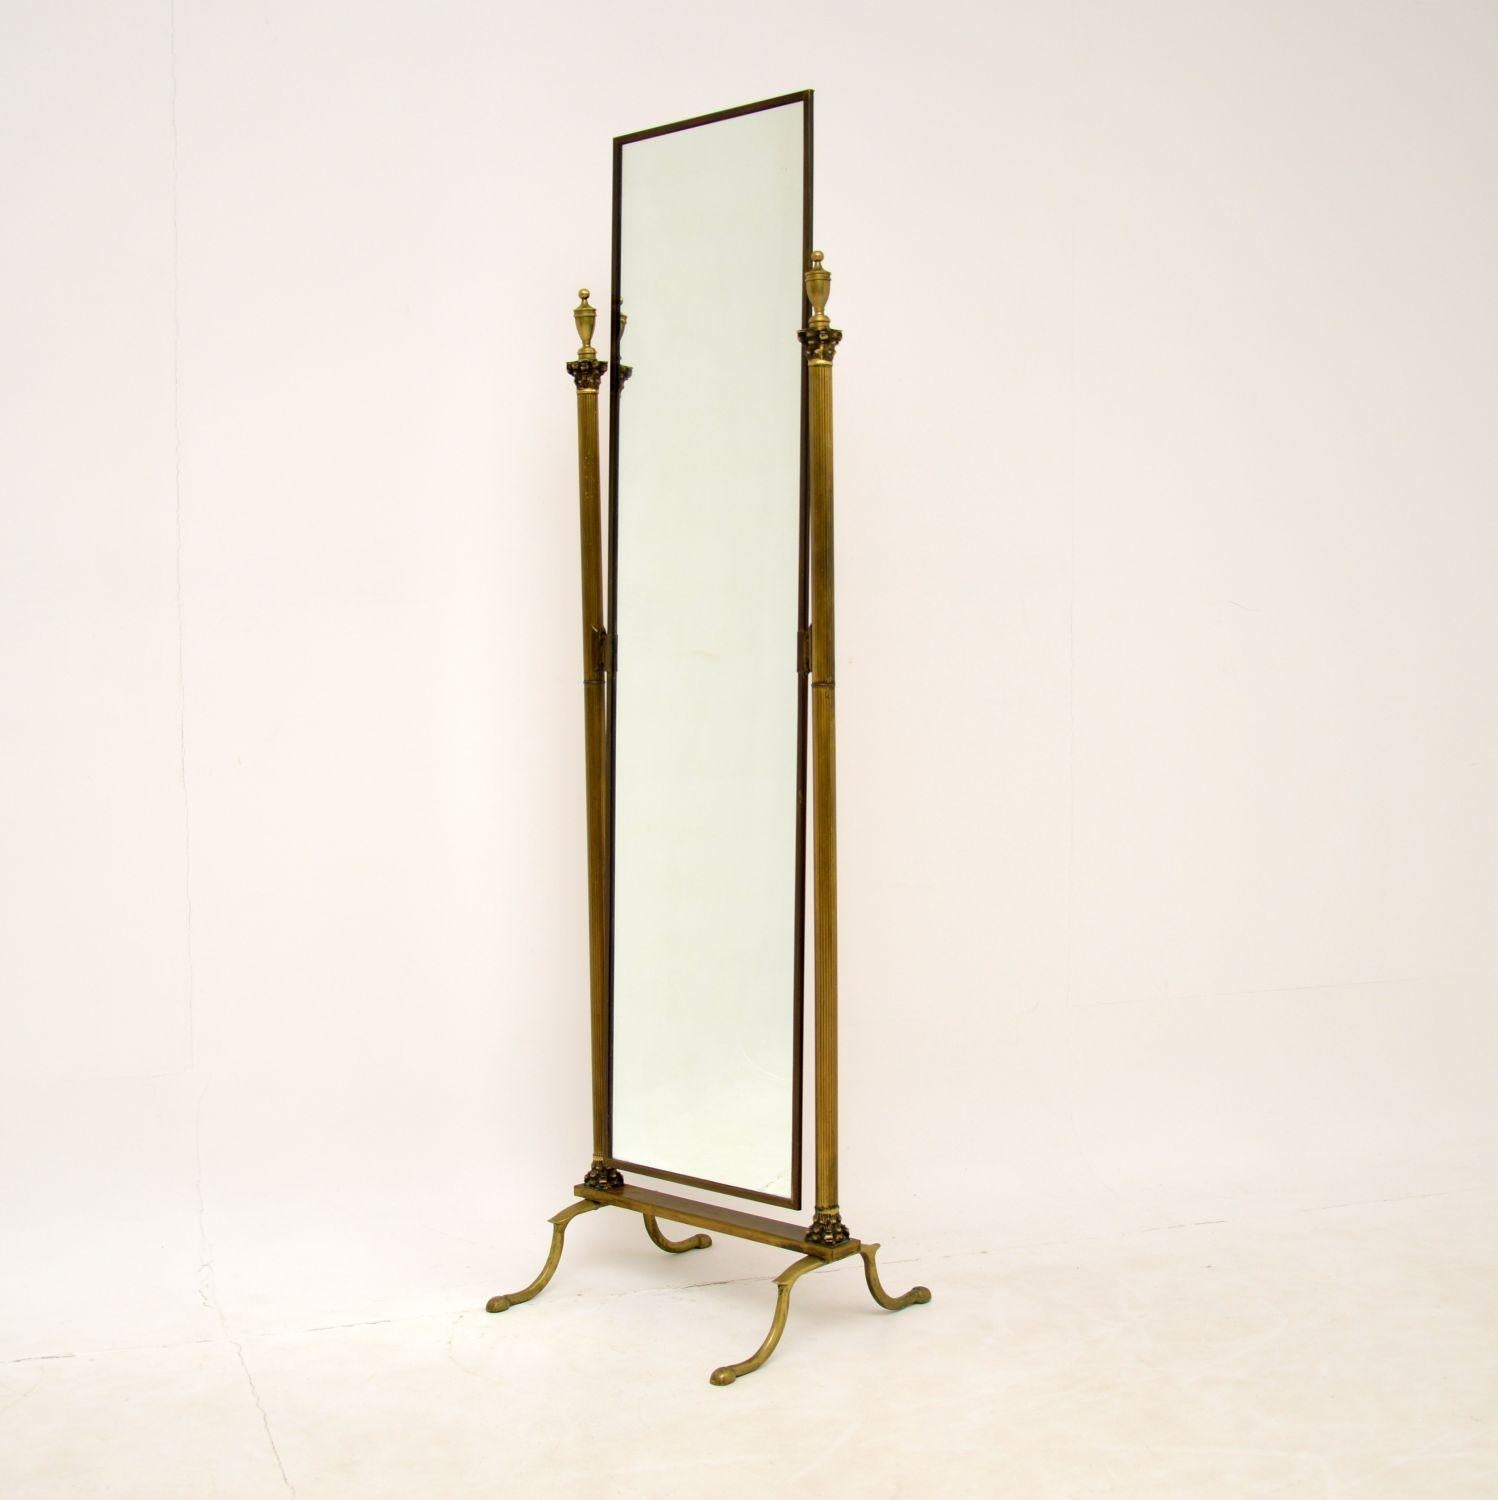 A fabulous solid brass cheval mirror, with beautiful neo-classical styling. This was made in England by Peerage, it dates from the 1960’s.

The quality is amazing, the supports are wonderfully shaped like Corinthian columns. The brass has a lovely